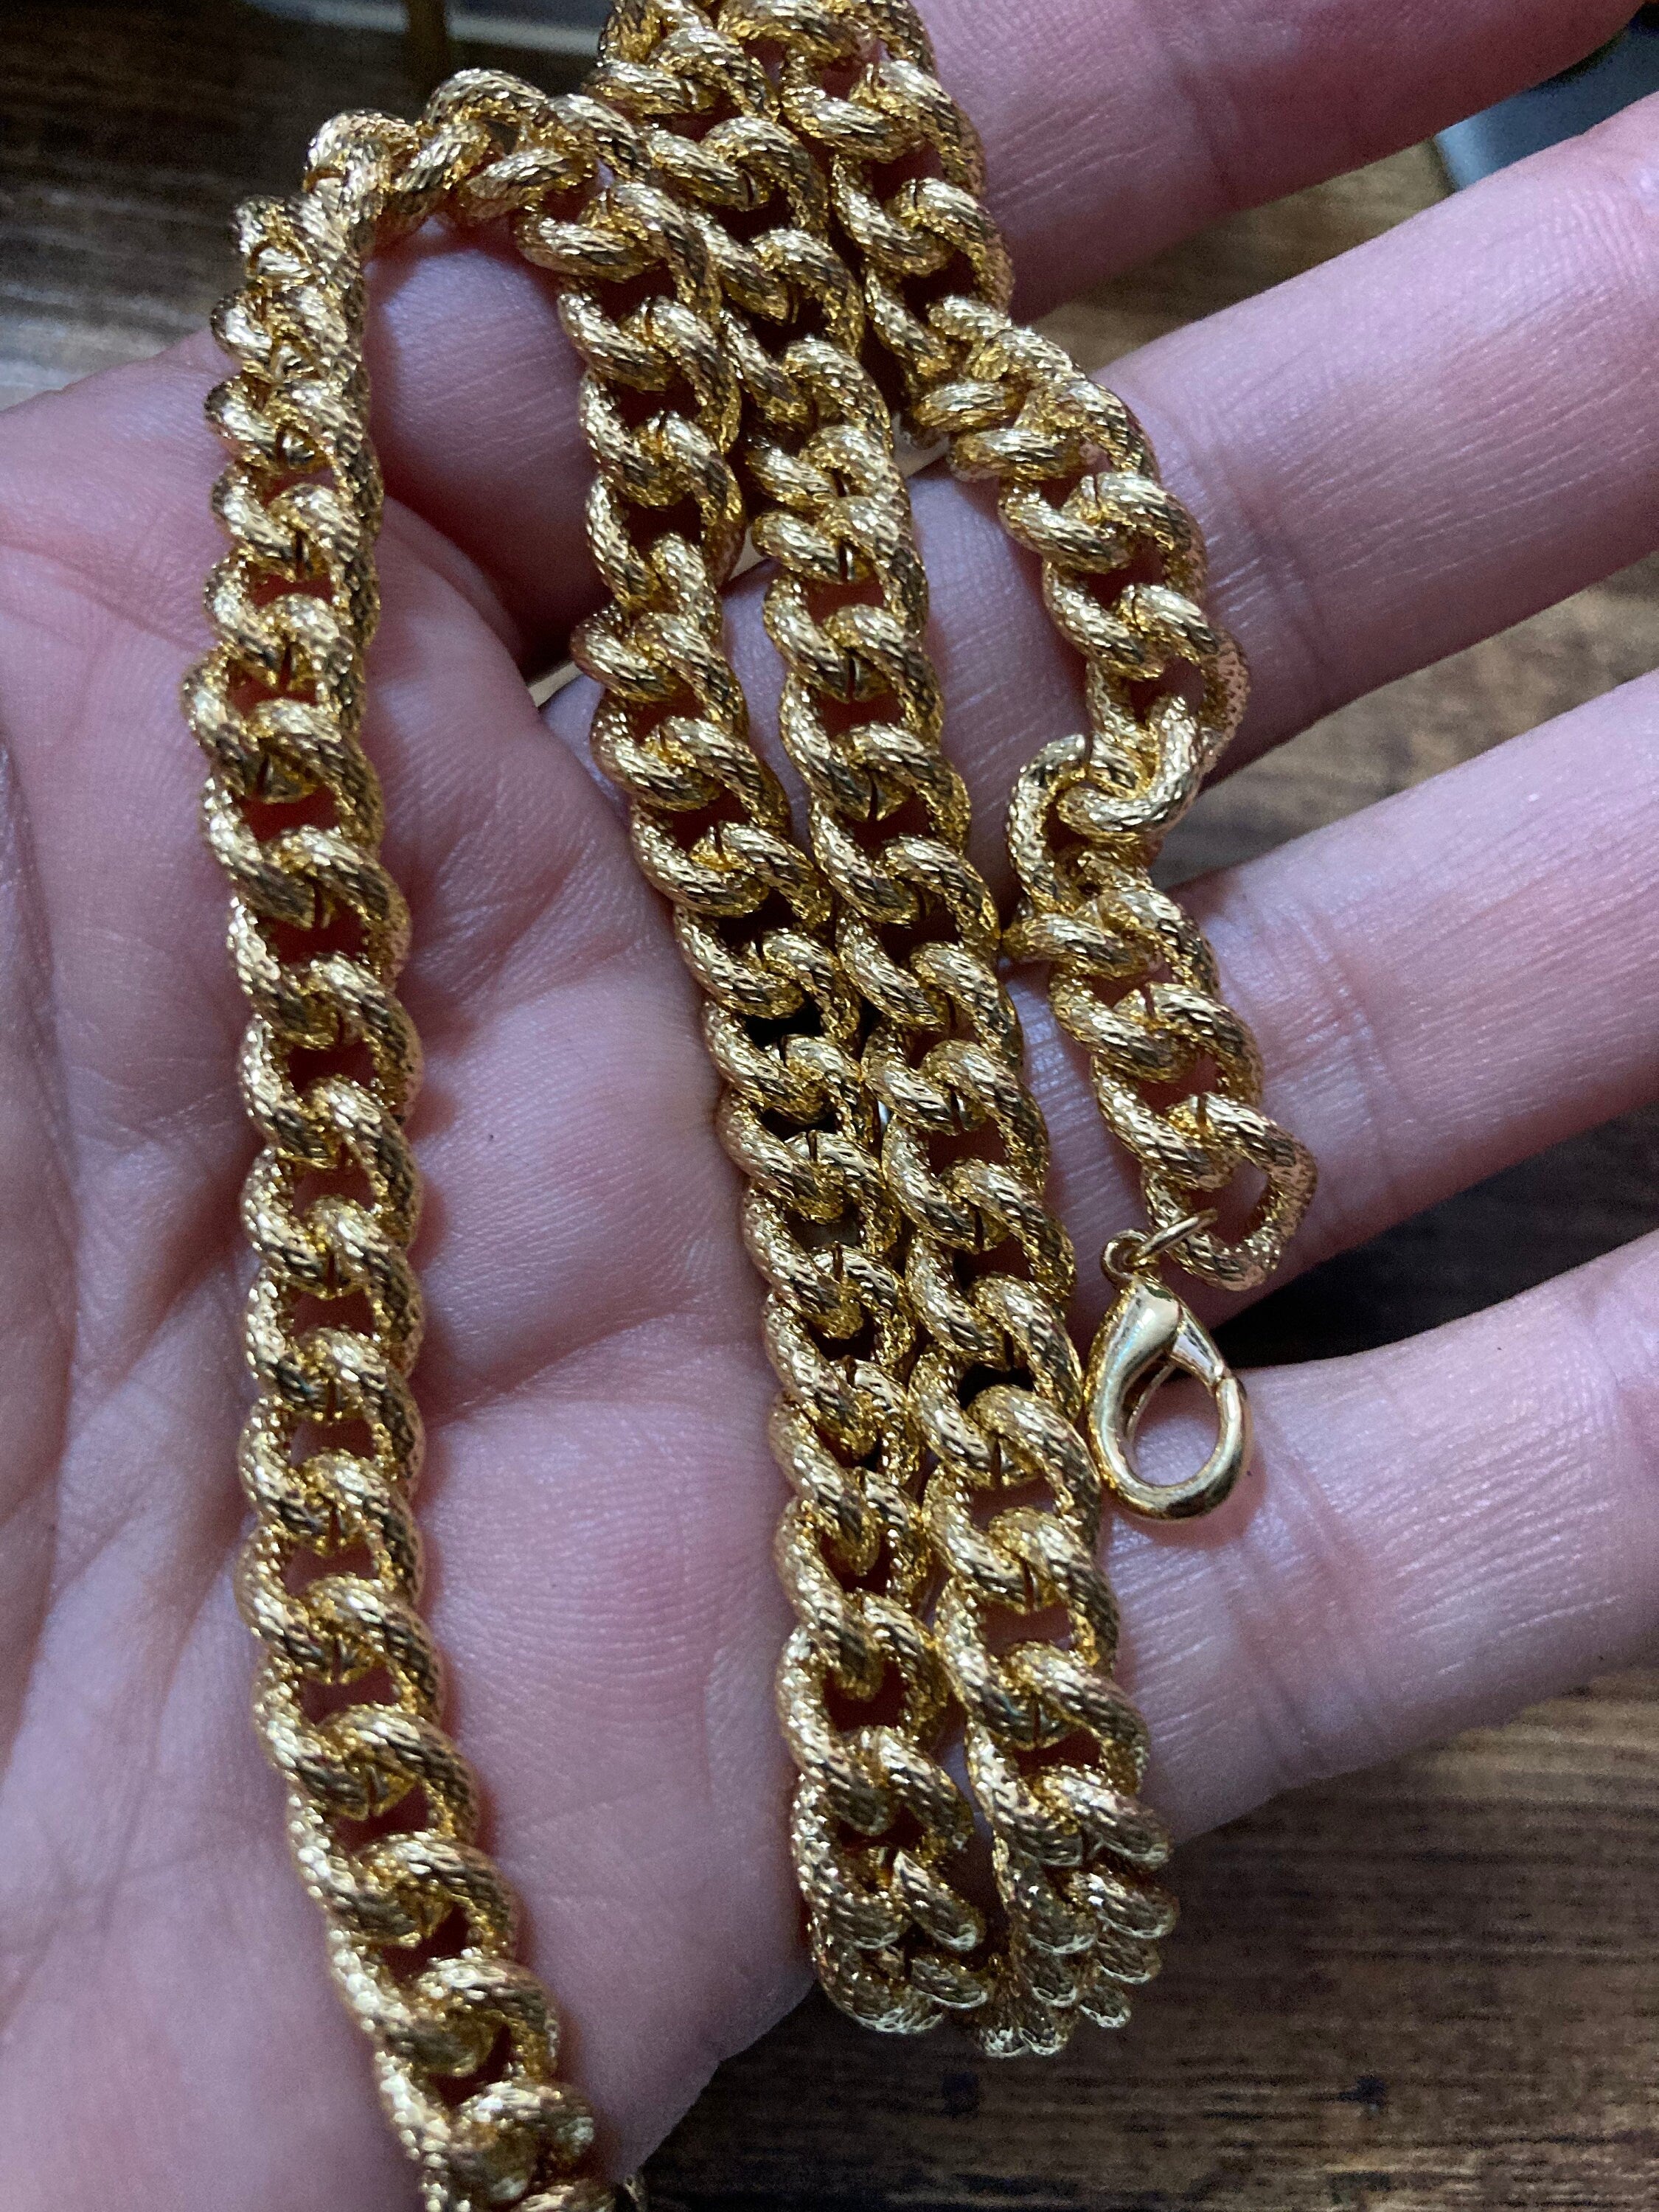 Giant Gold Curb Chain Necklace - Tilly Sveaas Jewellery